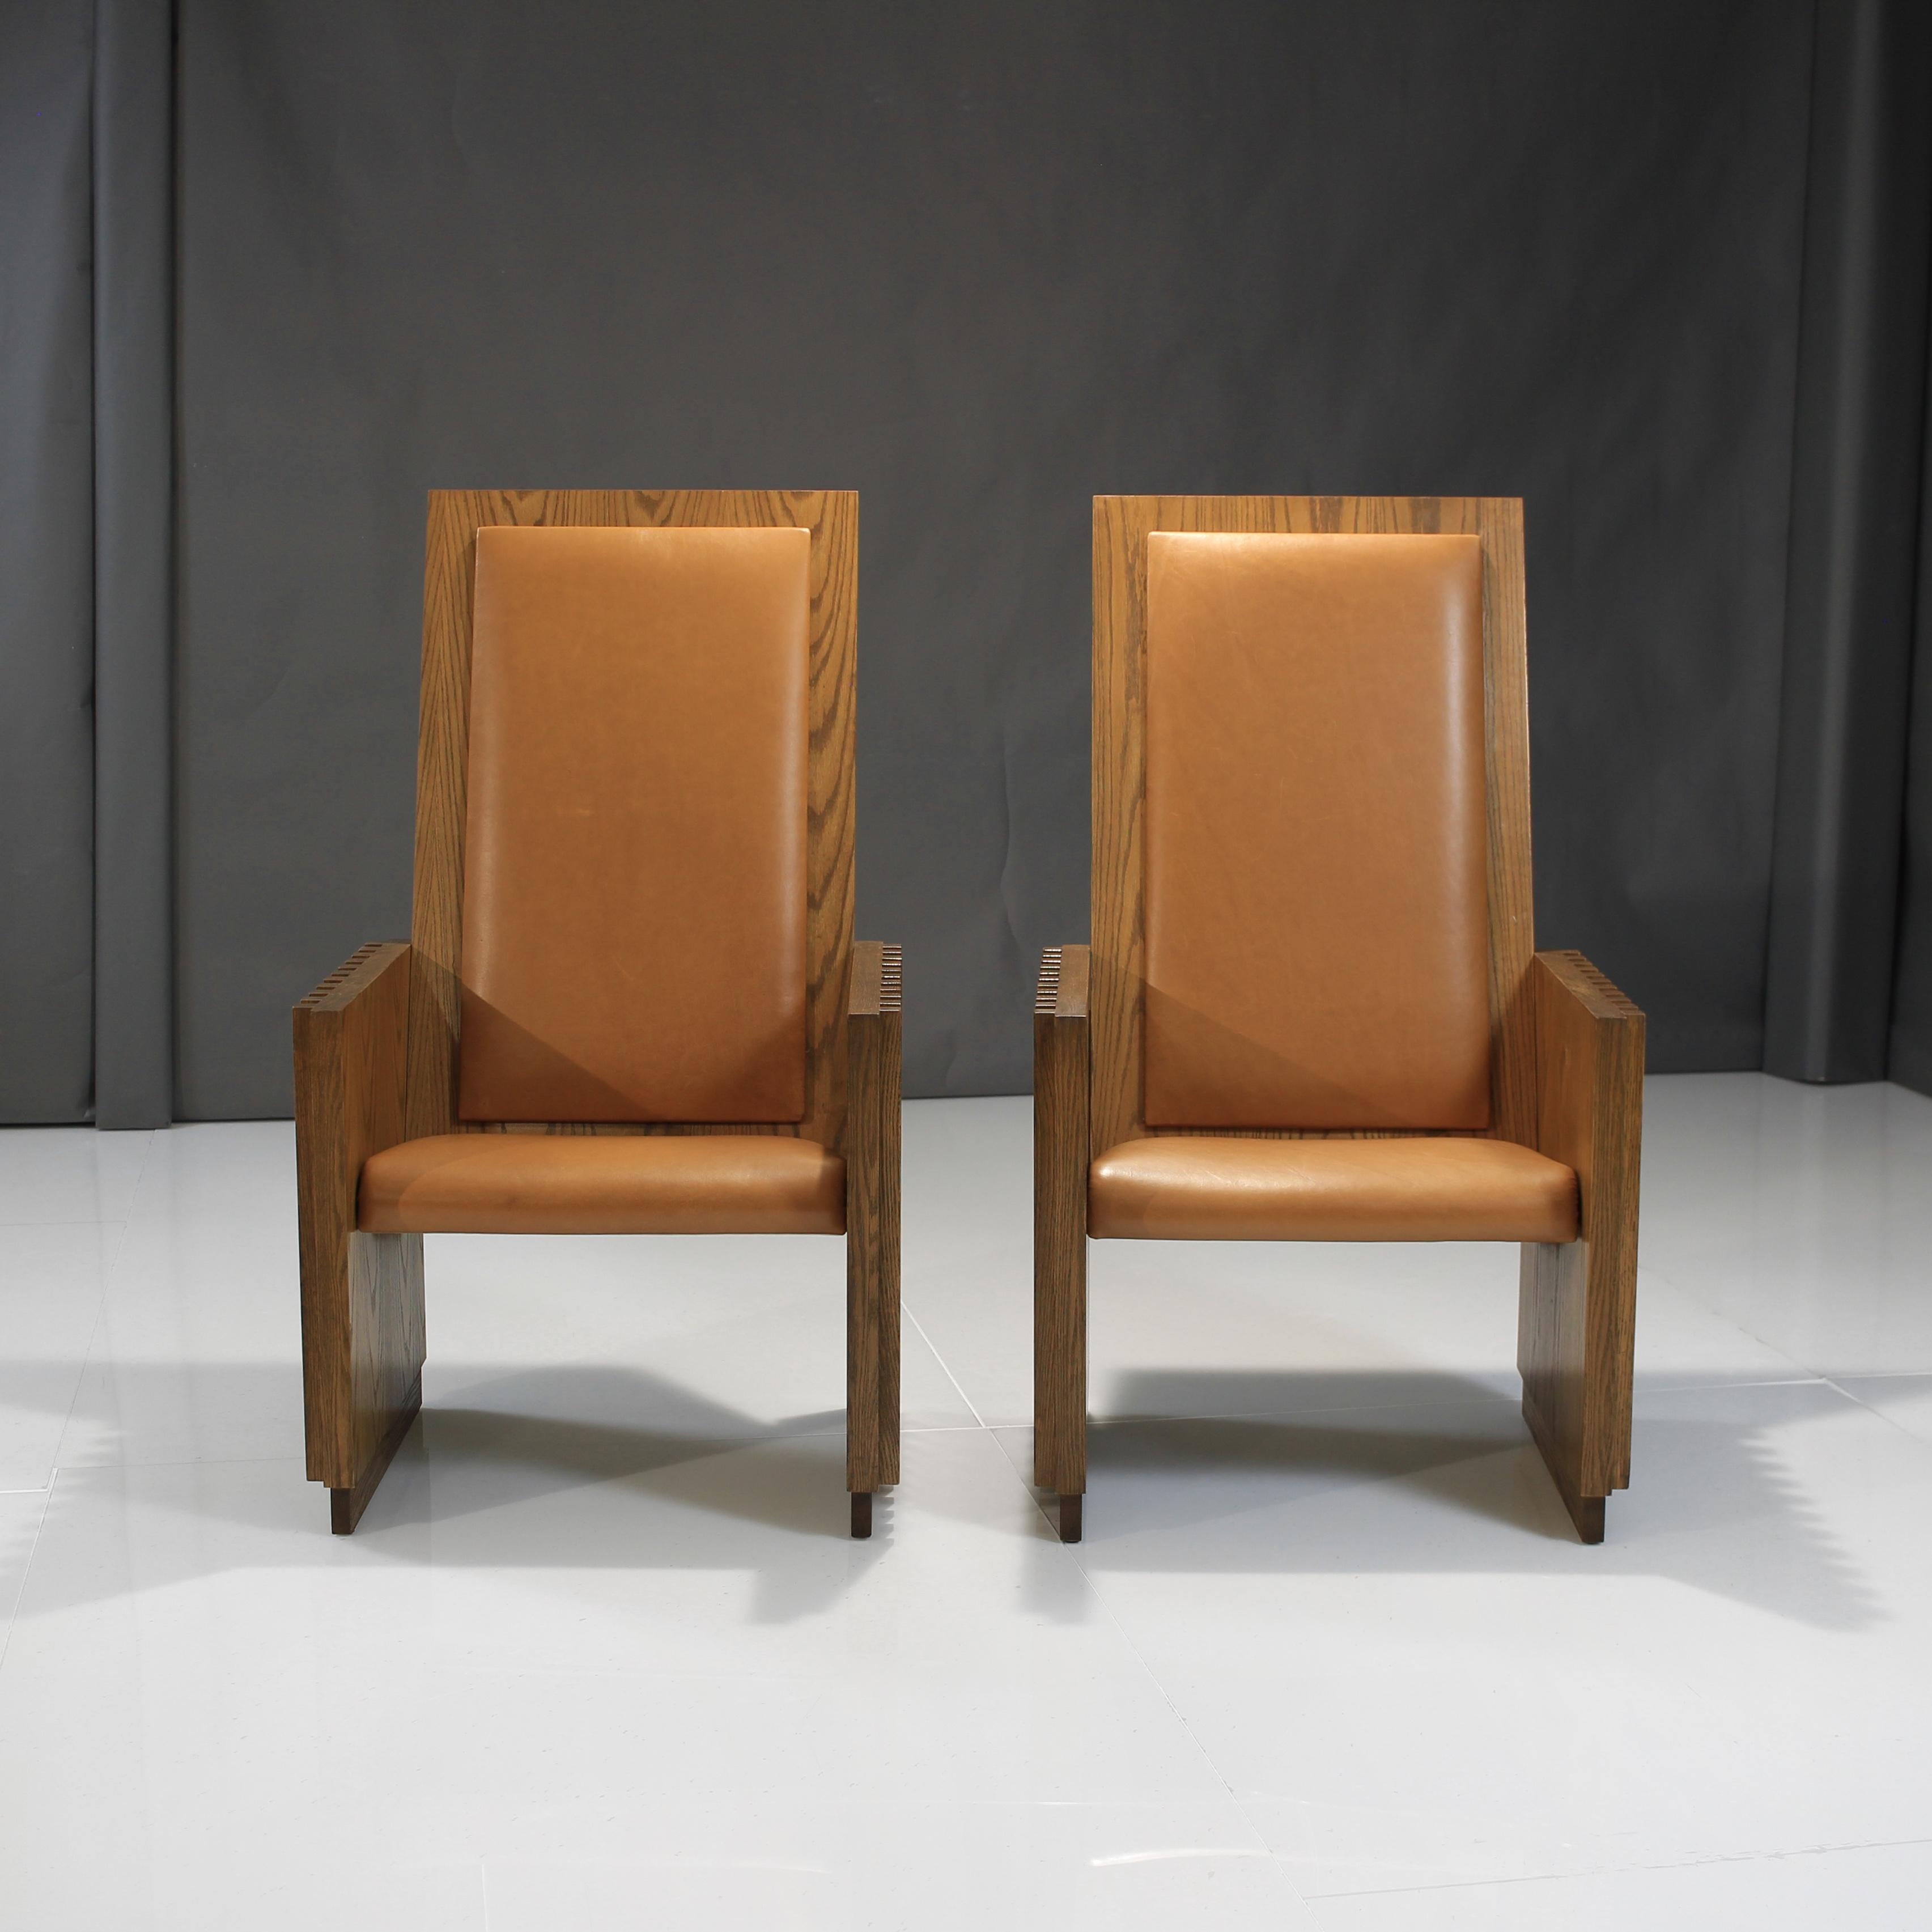 A rare pair of Solid Oak Chairs from the midcentury. Offering incredible visuals, beautiful construction and a very stately presence. Thus we have given them the King and Queen title.

Upholstered in a Caramel Italian Leather showing gorgeous